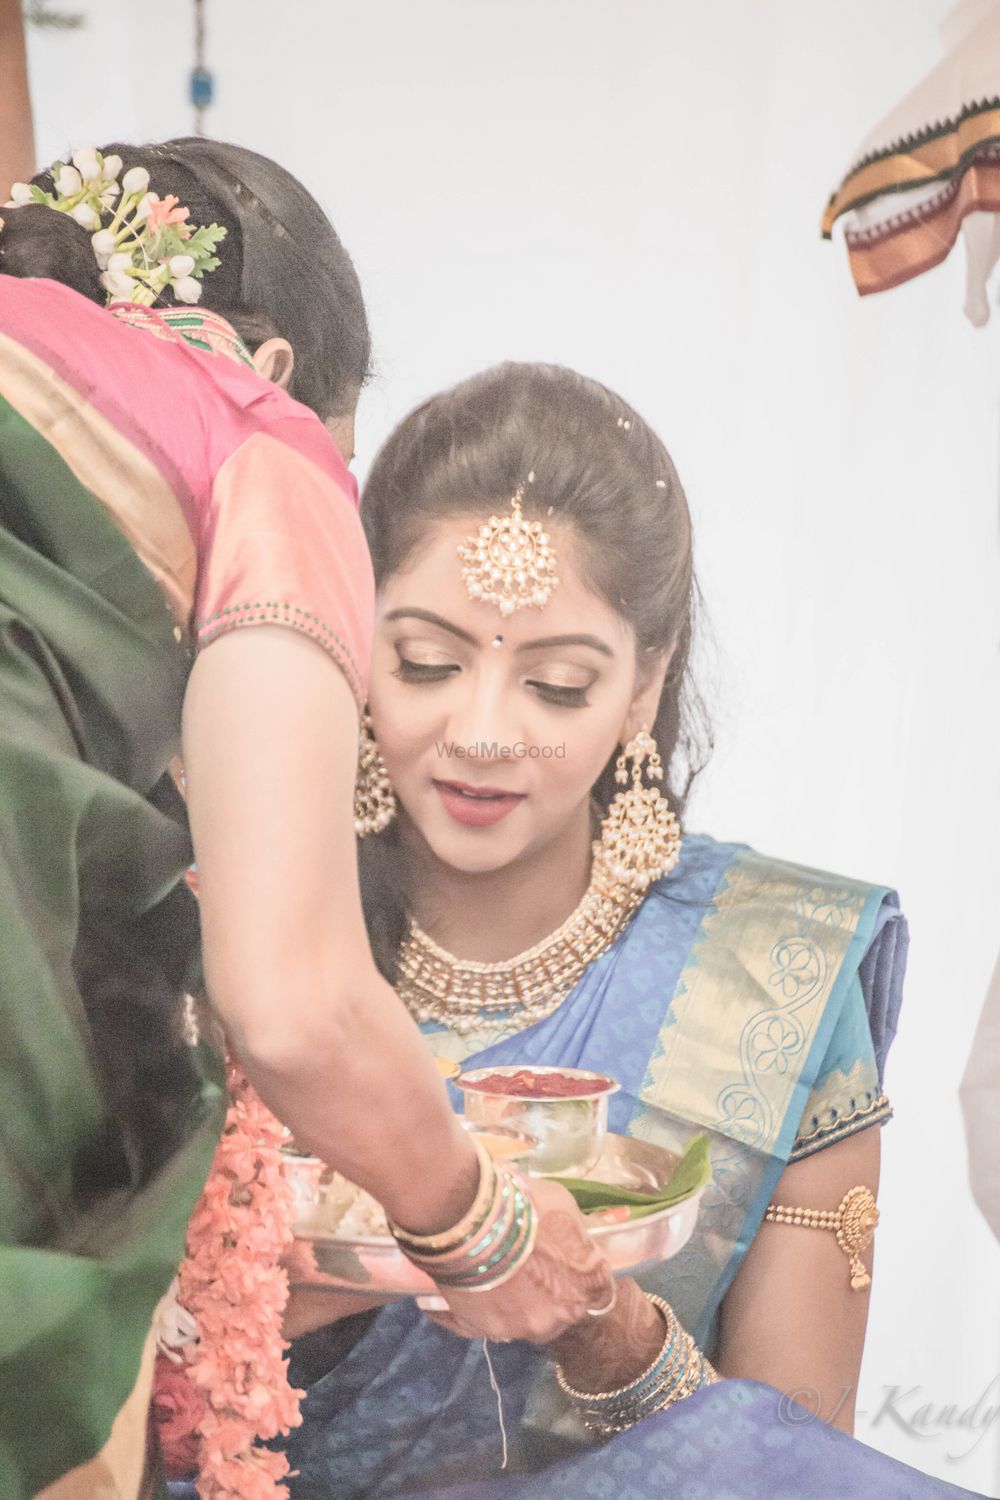 Photo From Sandhya & Aasish - By I Kandy Productions